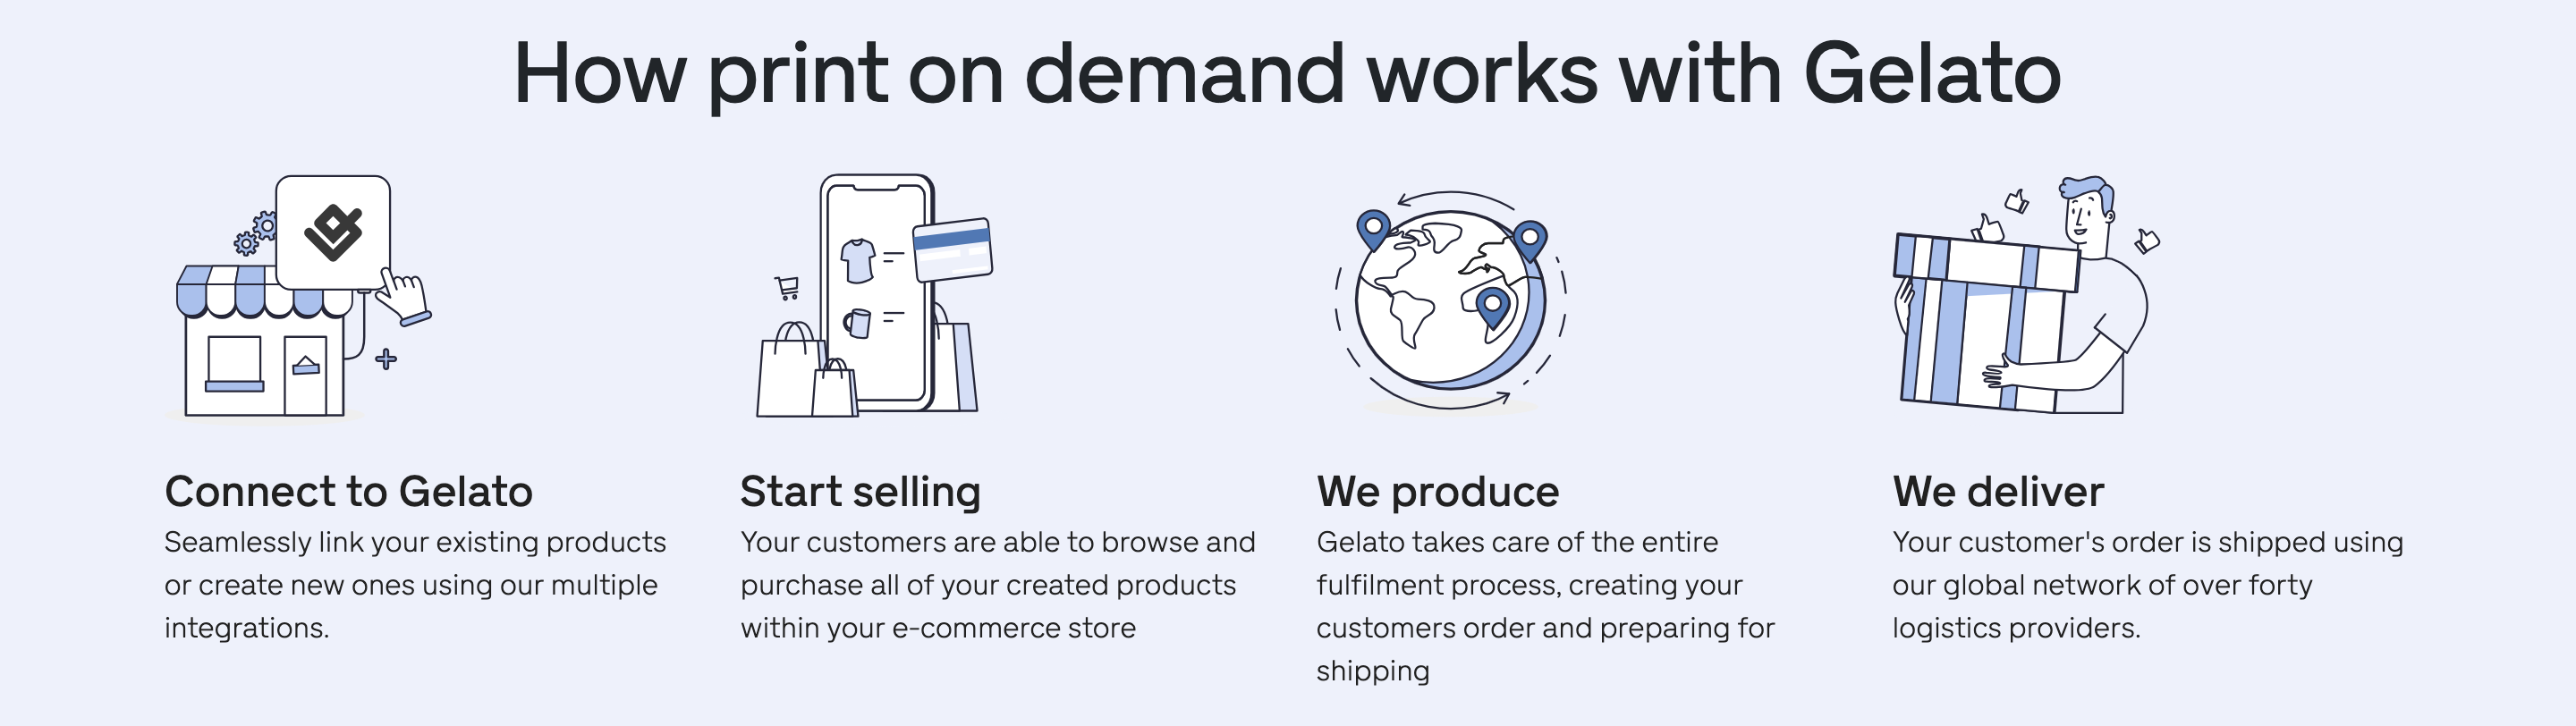 How print on demand works with Gelato